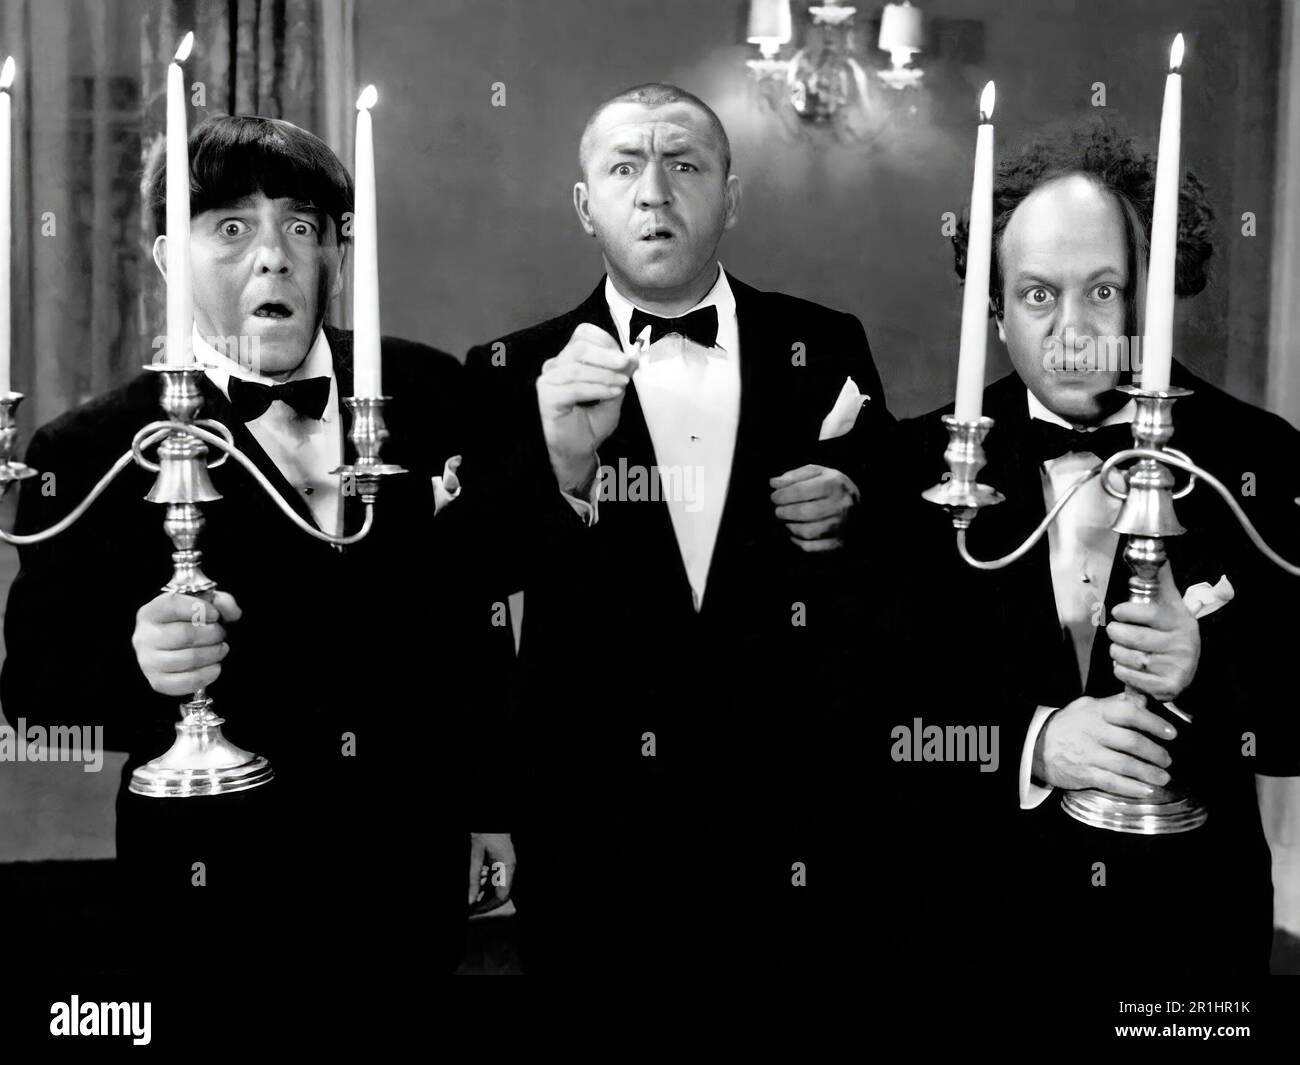 MOE HOWARD, LARRY FINE, CURLY HOWARD and THE THREE STOOGES in SPOOK LOUDER (1943), directed by DEL LORD. Credit: COLUMBIA PICTURES / Album Stock Photo